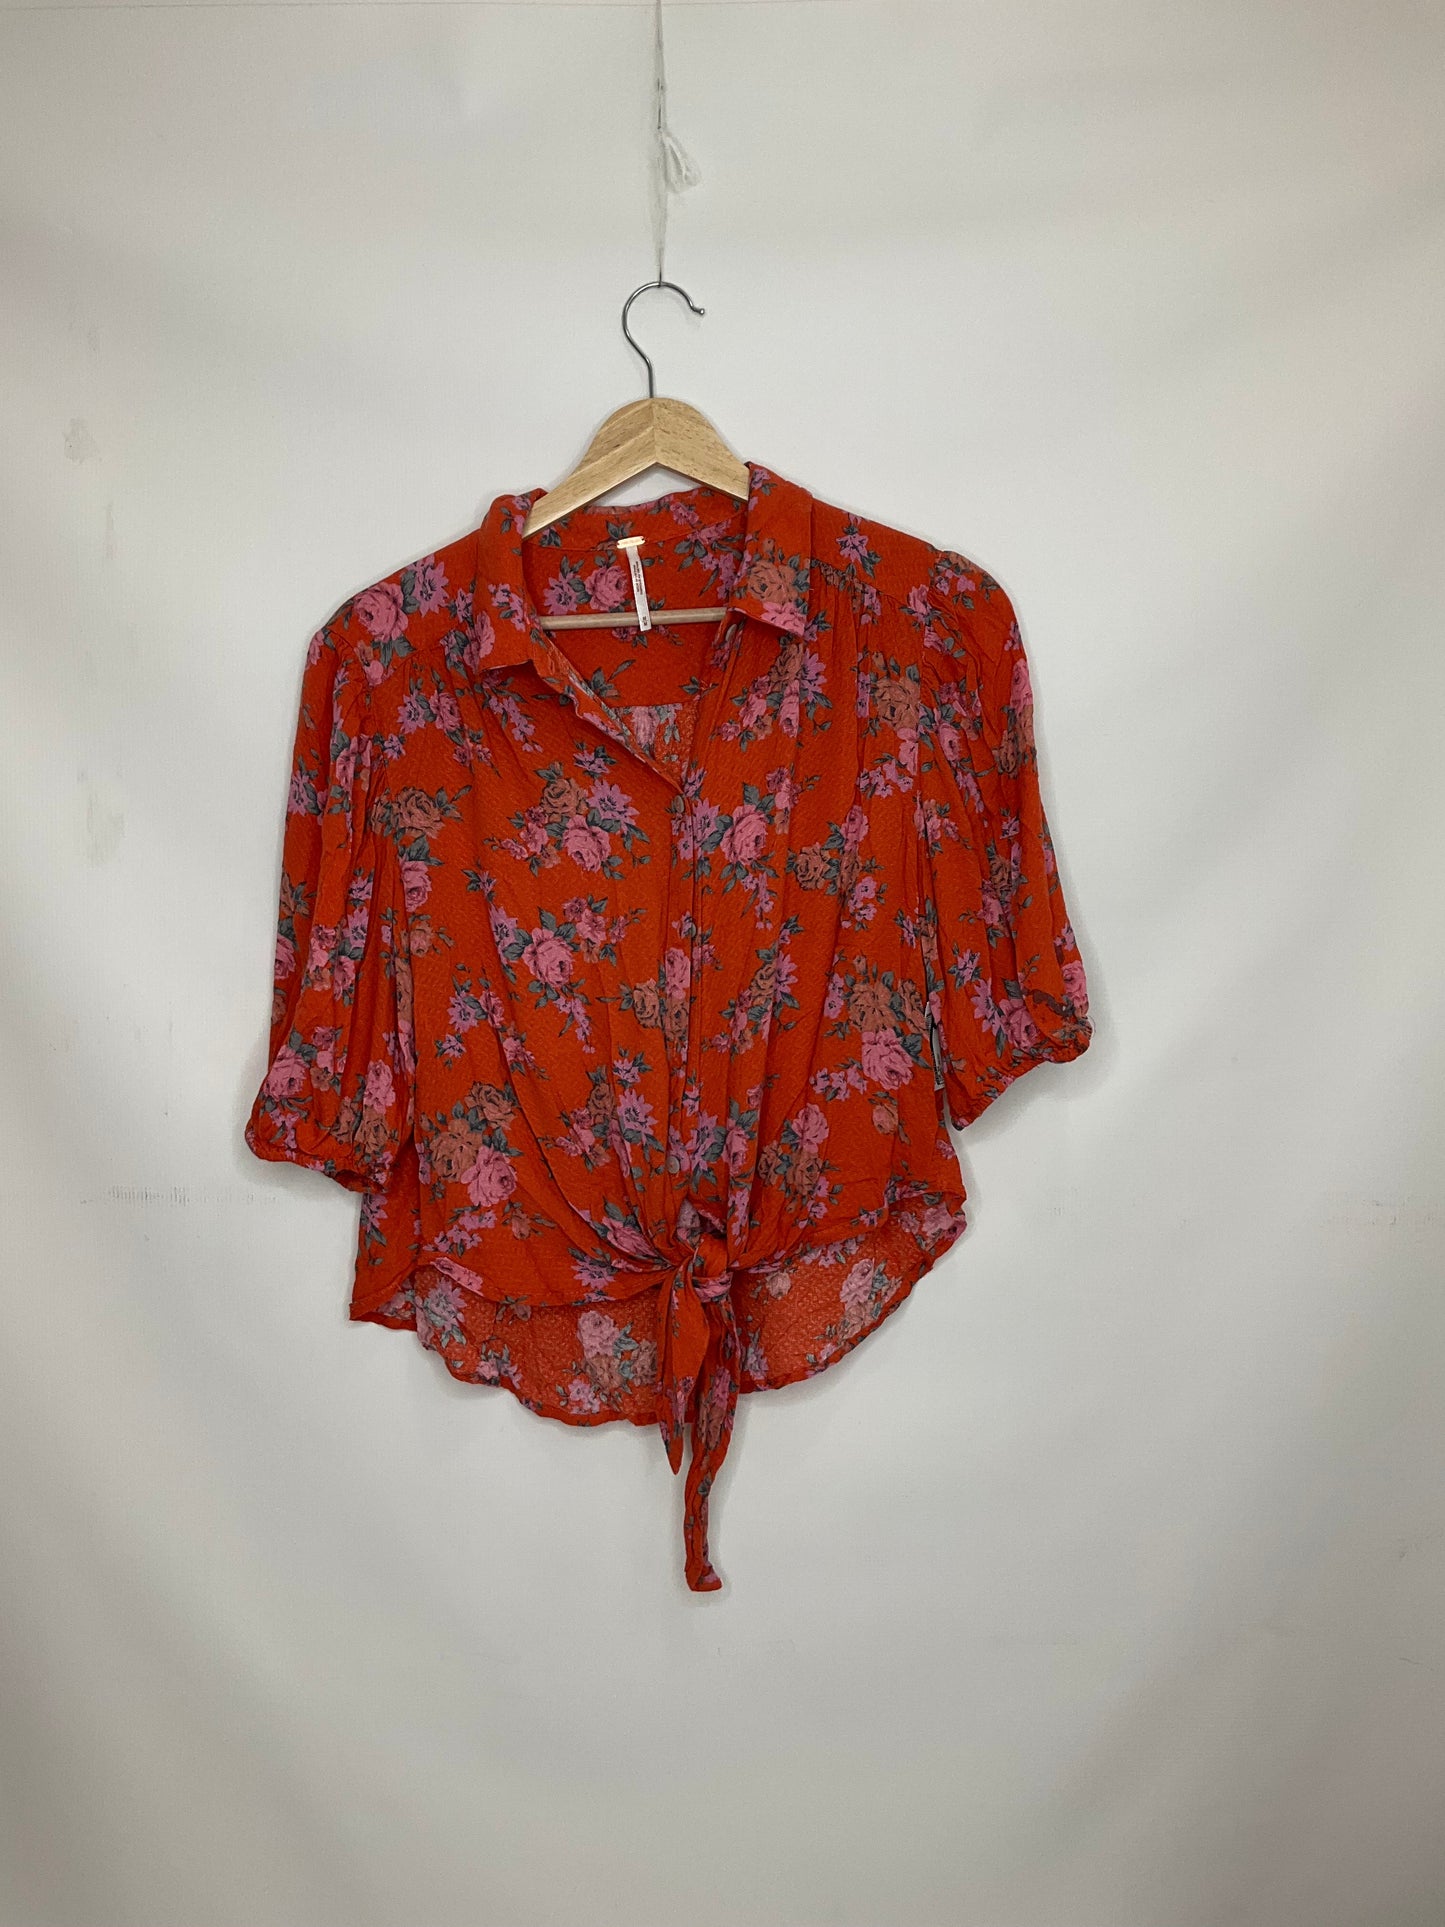 Floral Print Top Short Sleeve Free People, Size M